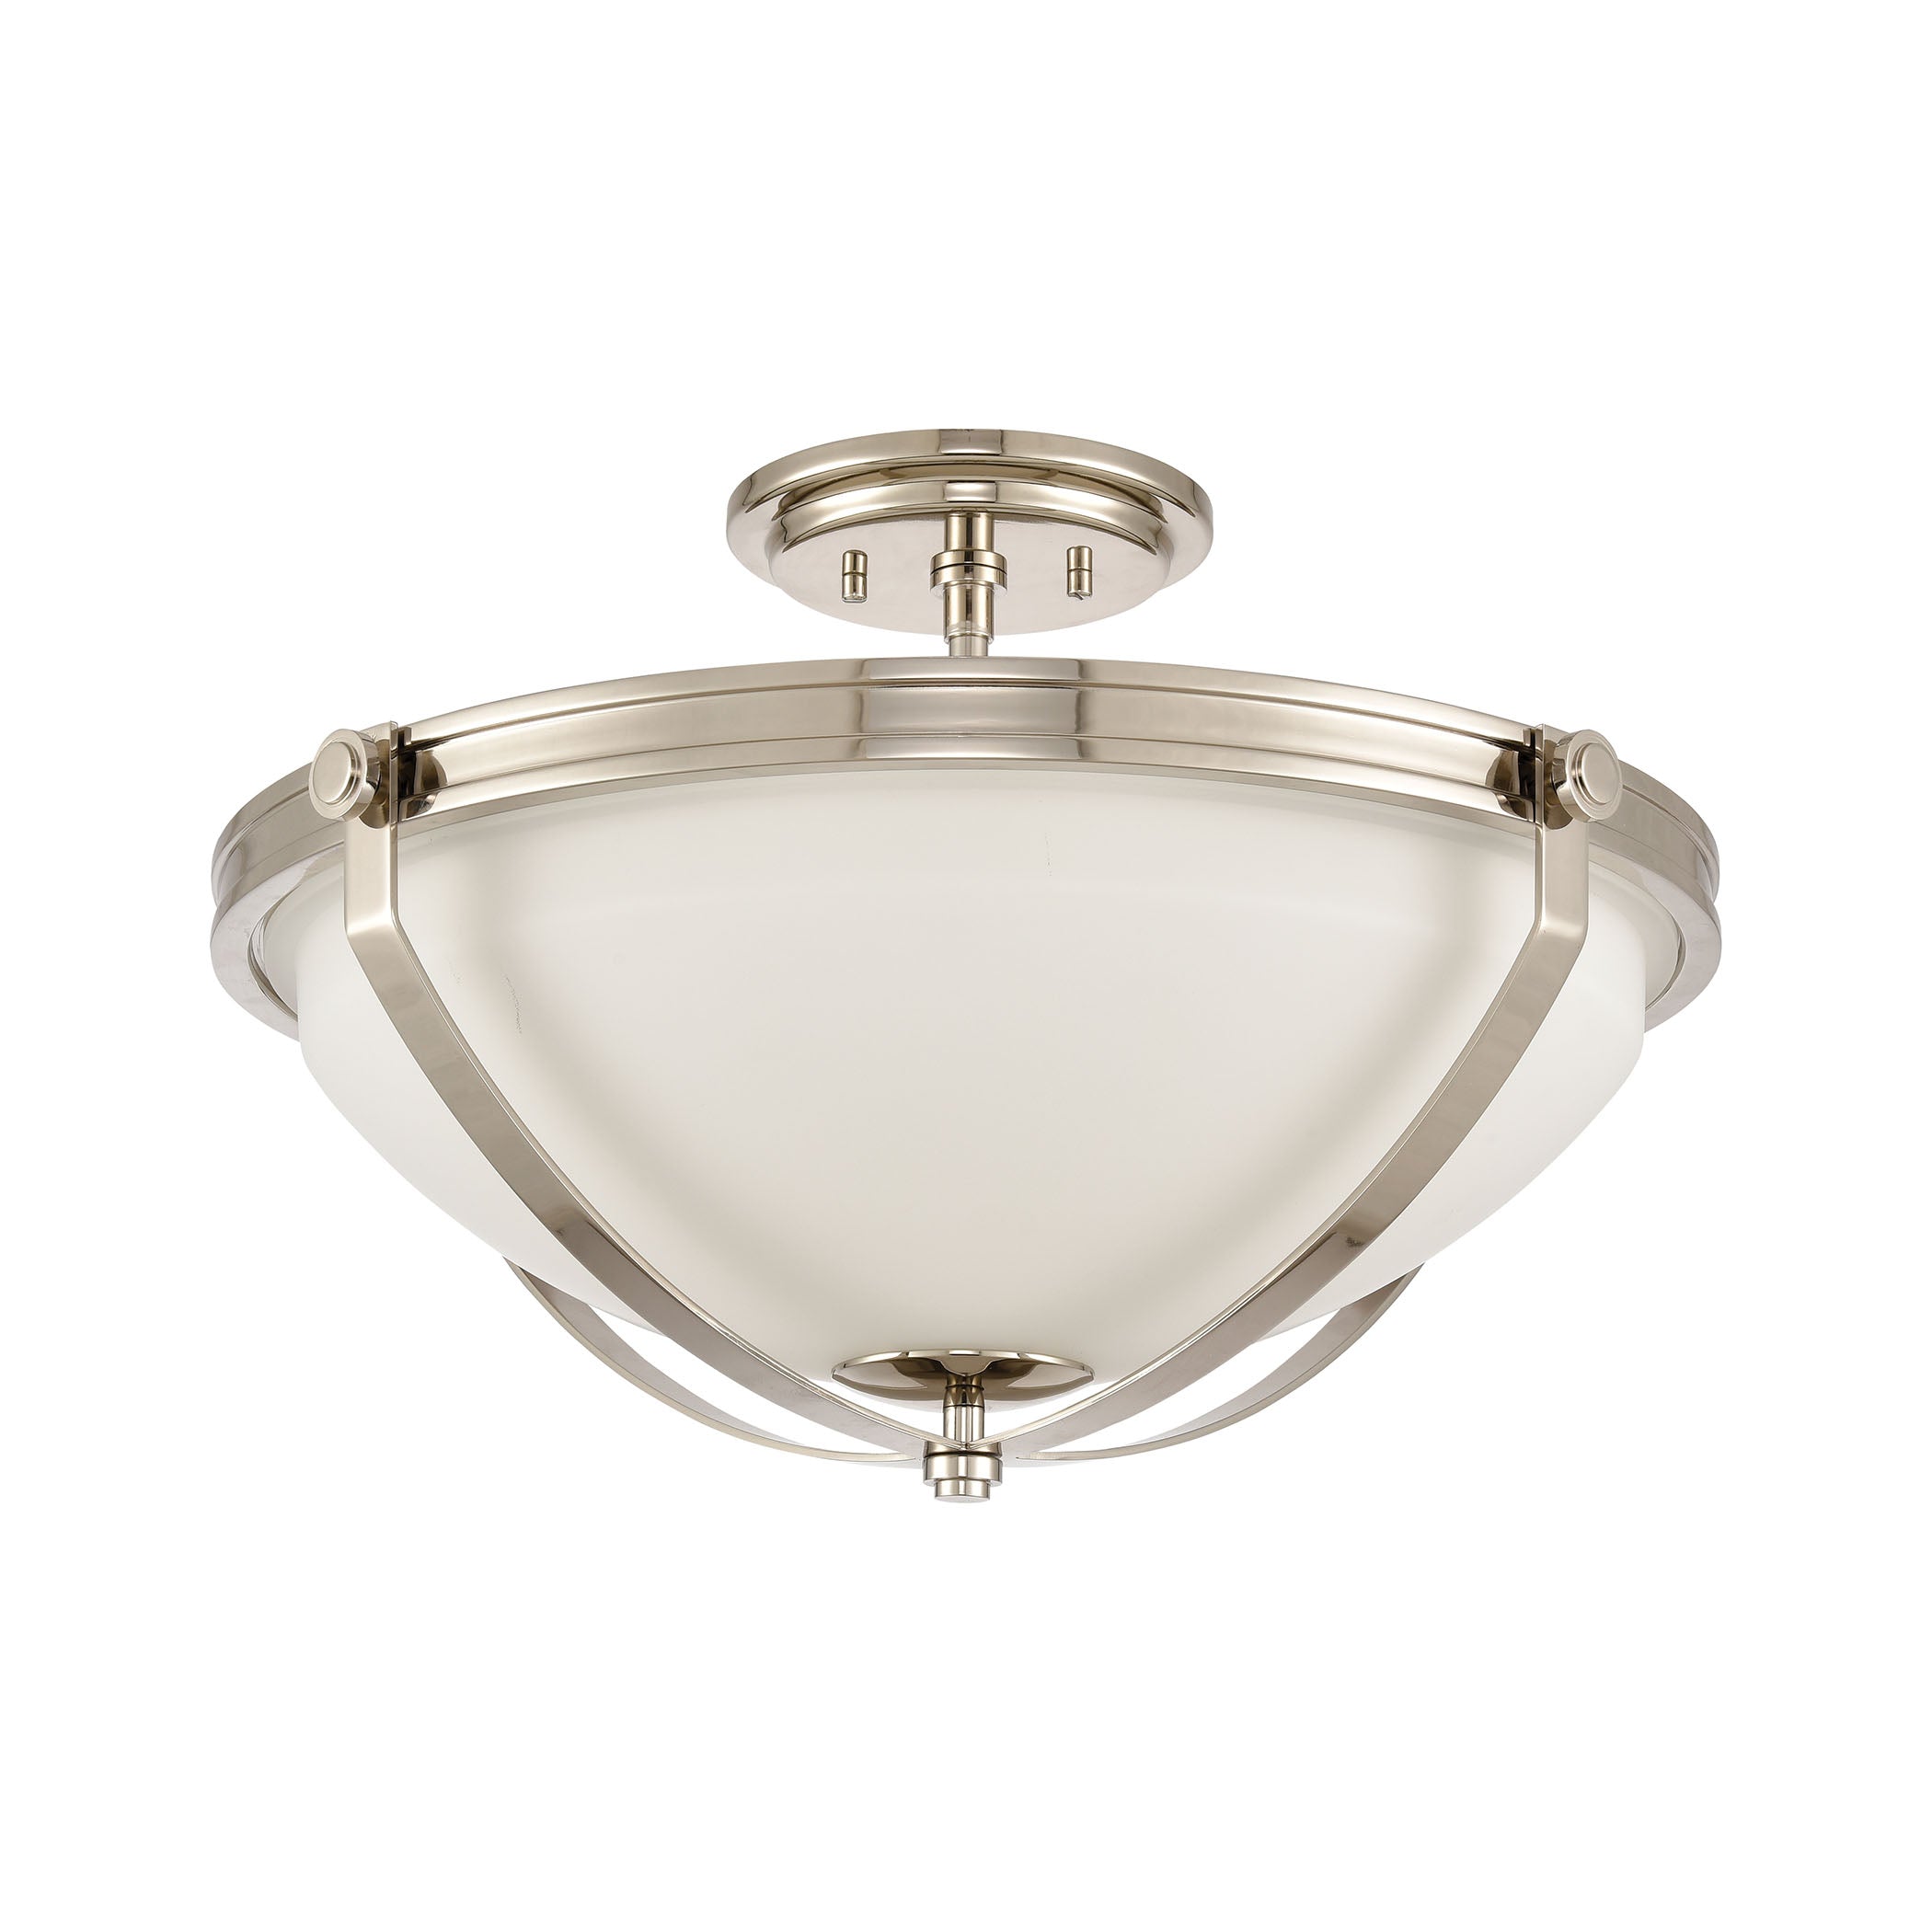 ELK Lighting 89105/3 Connelly 3-Light Semi Flush in Polished Nickel with Frosted and Painted White Glass